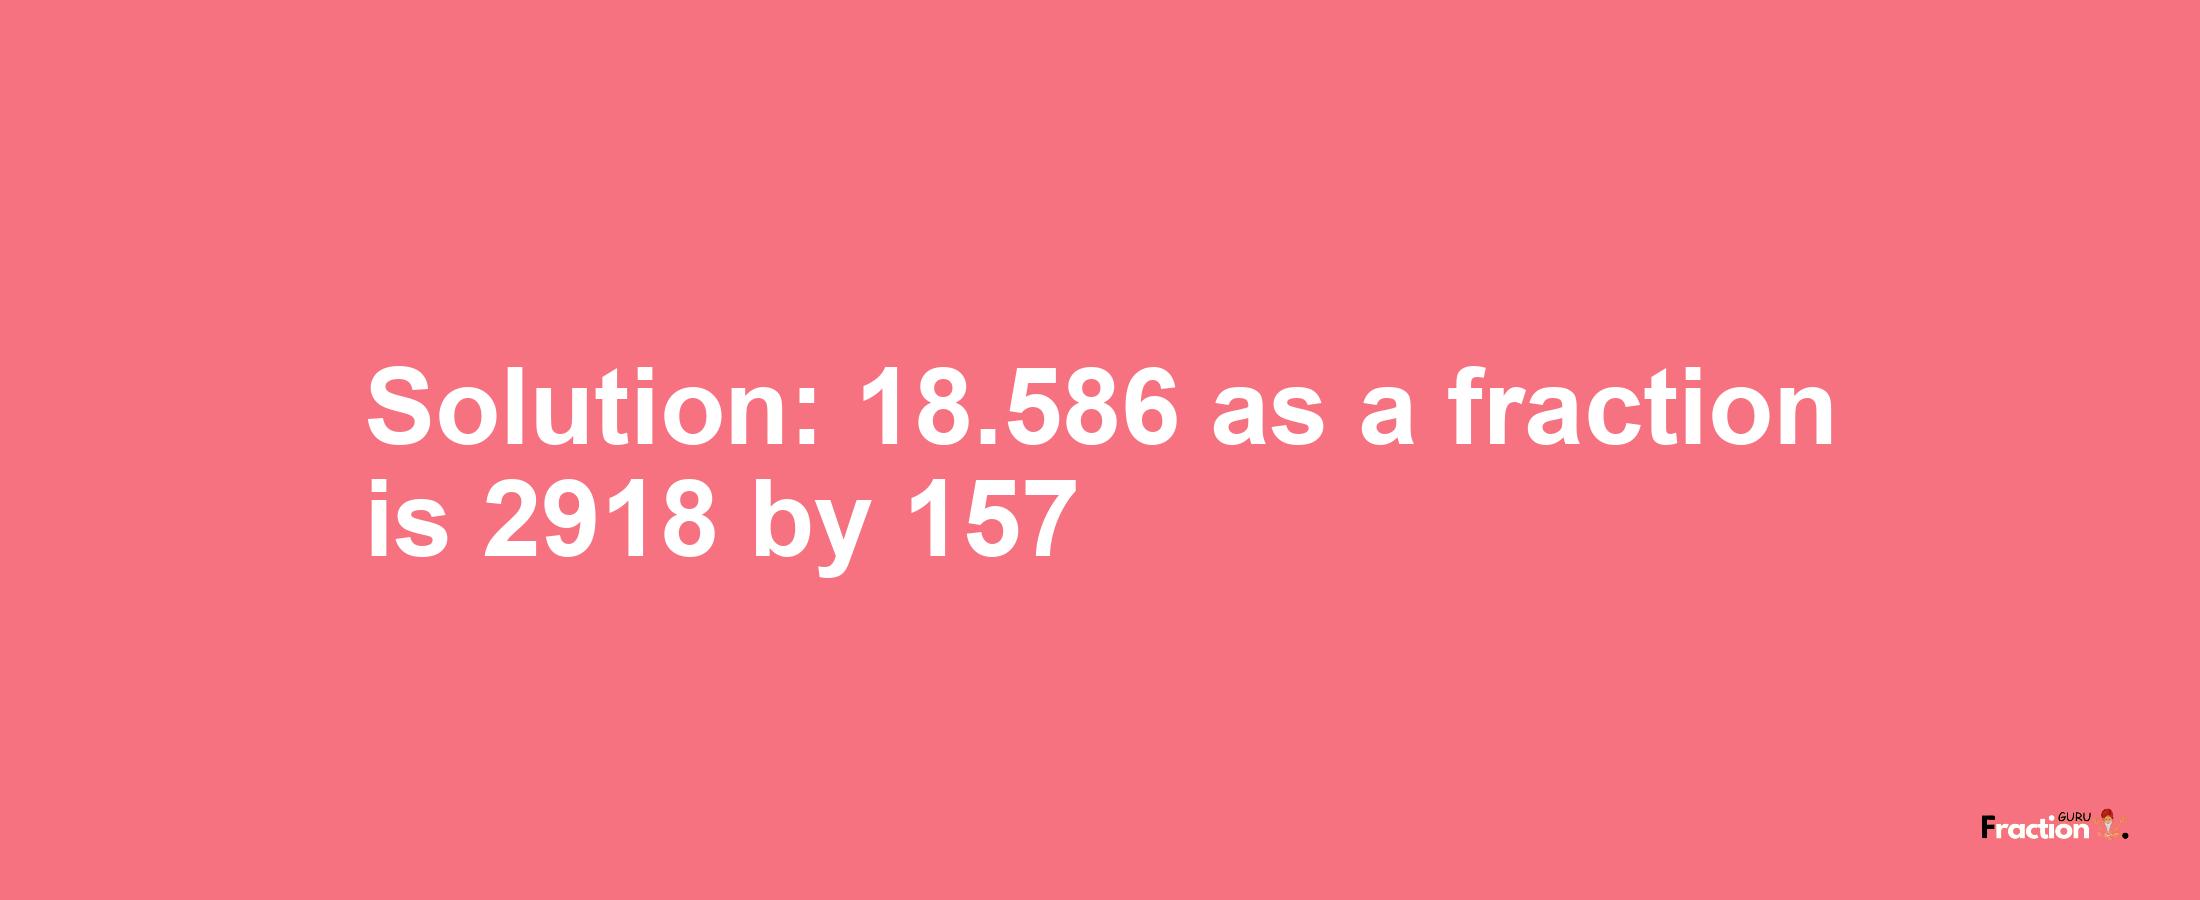 Solution:18.586 as a fraction is 2918/157